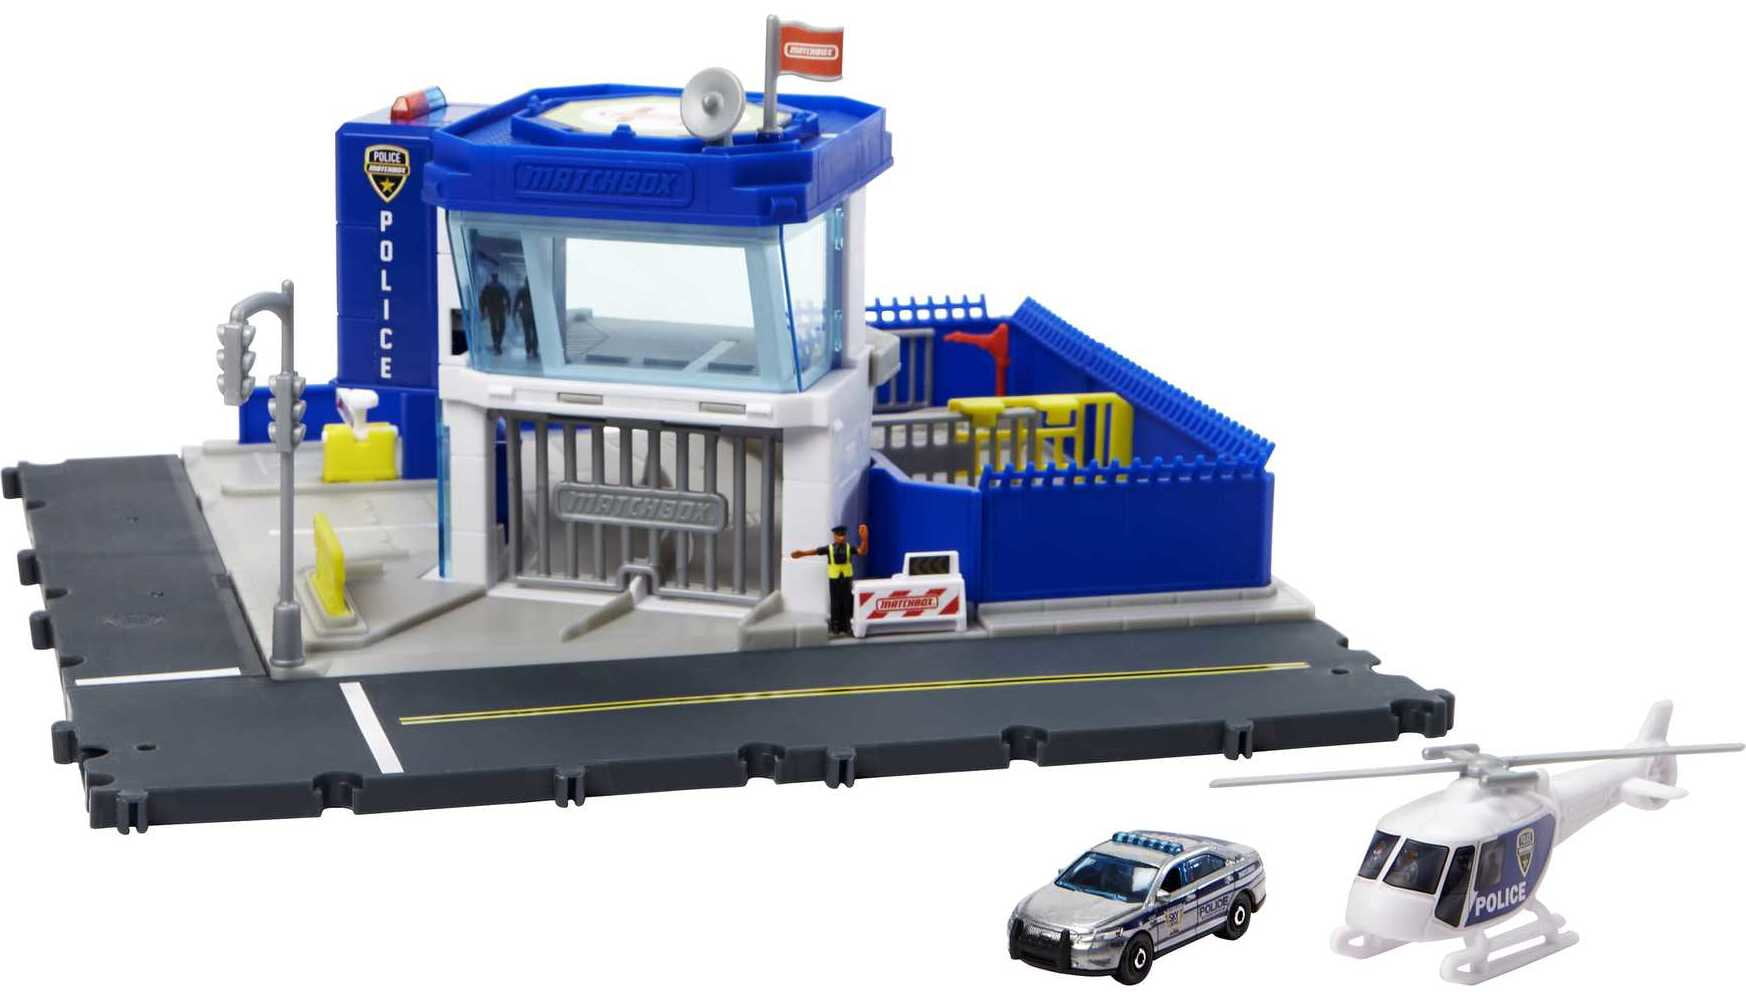 Matchbox Police Station Dispatch Playset with 1:64 Scale Toy Helicopter & Police Car Featuring Lights & Sounds $7